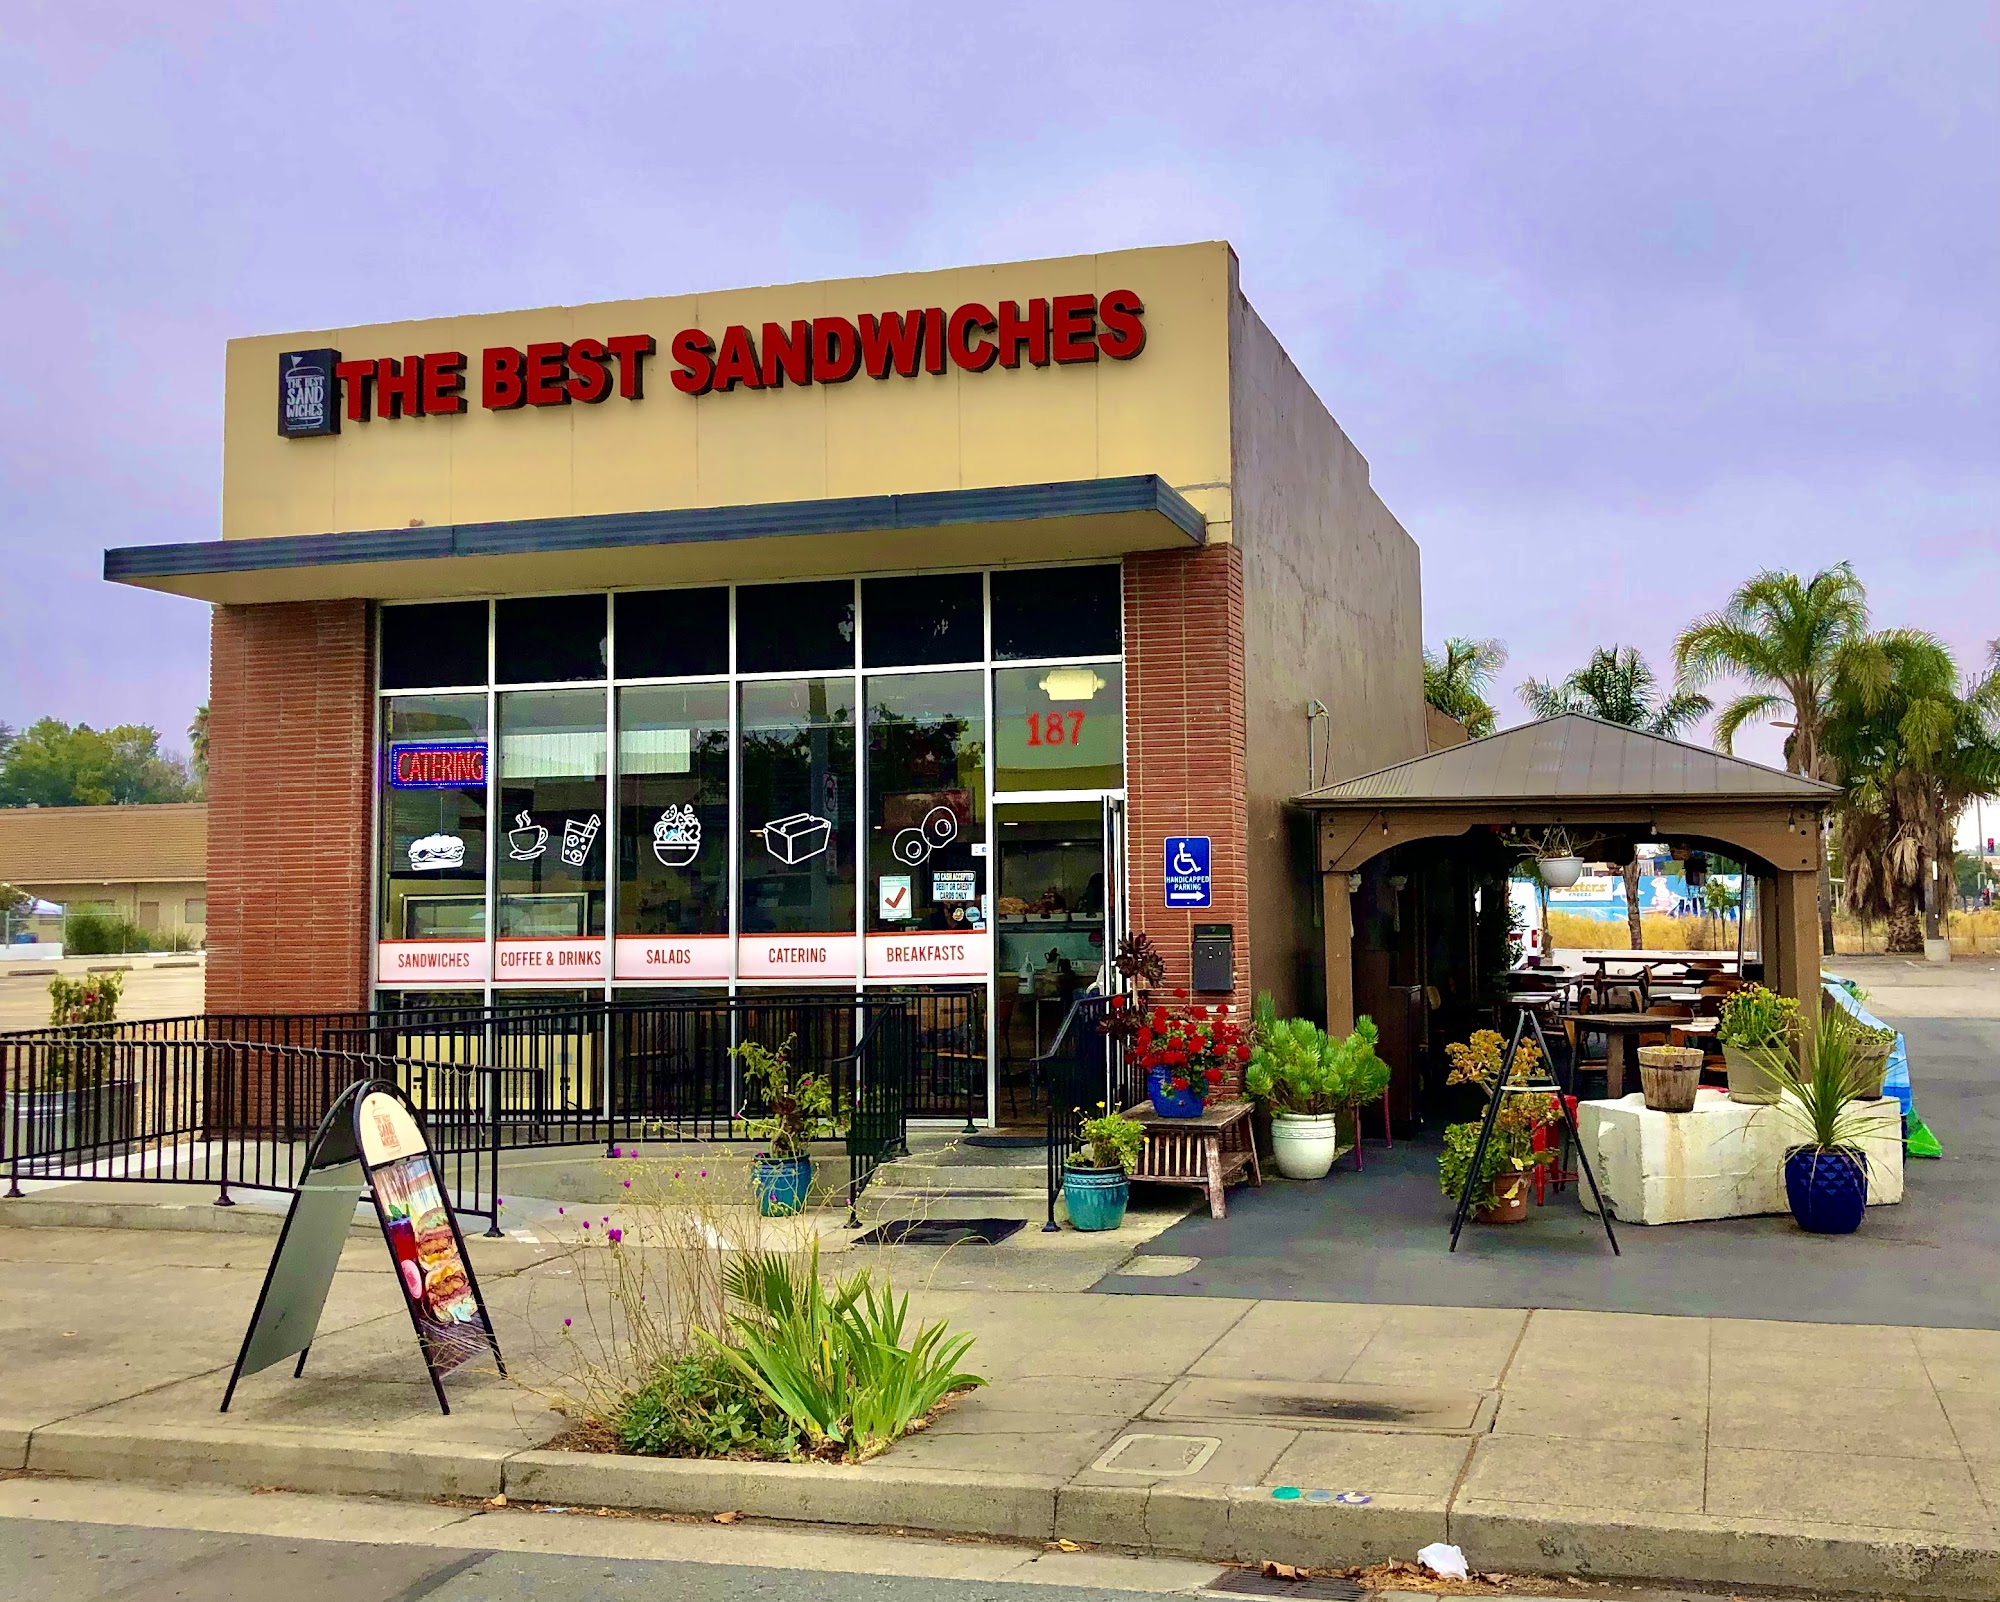 The Best Sandwiches